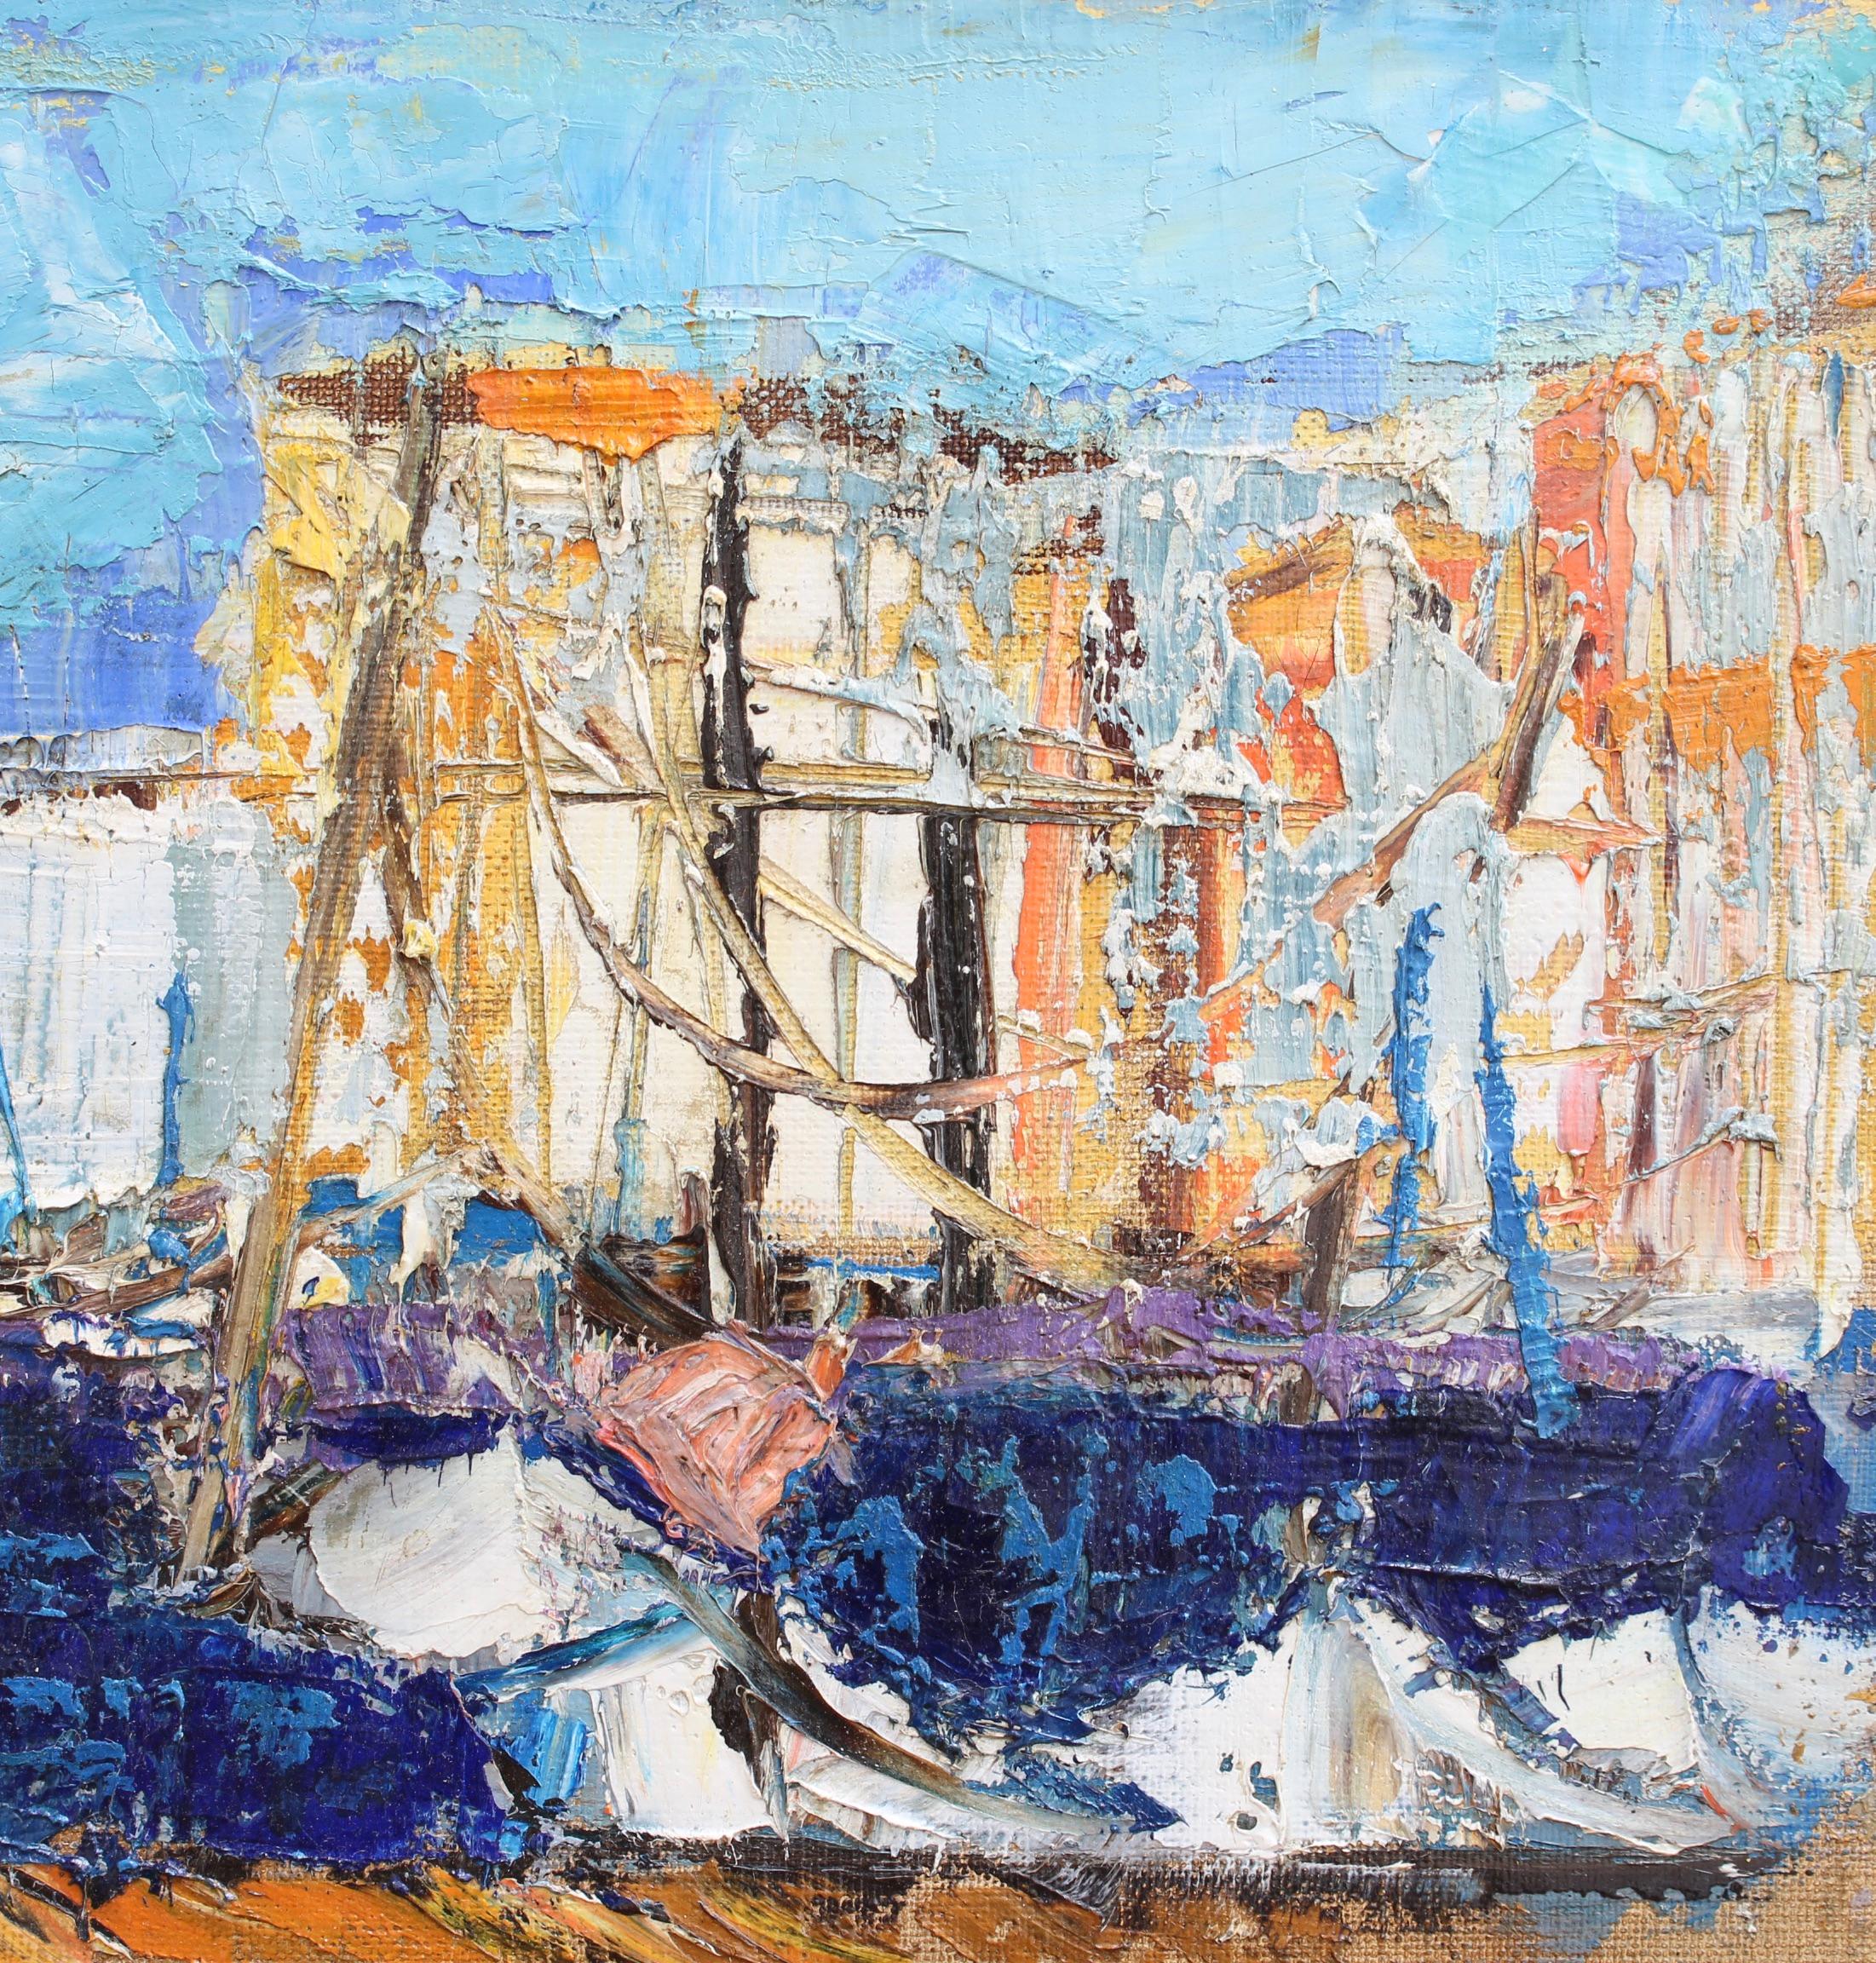 'The Old Port Marseille', oil on canvas, by Françoise Pirró (circa 1970s-80s). The way the artist employs her thick brush strokes and palette knife with vibrant colours creates an image that embodies elements of abstraction and cubism. Her